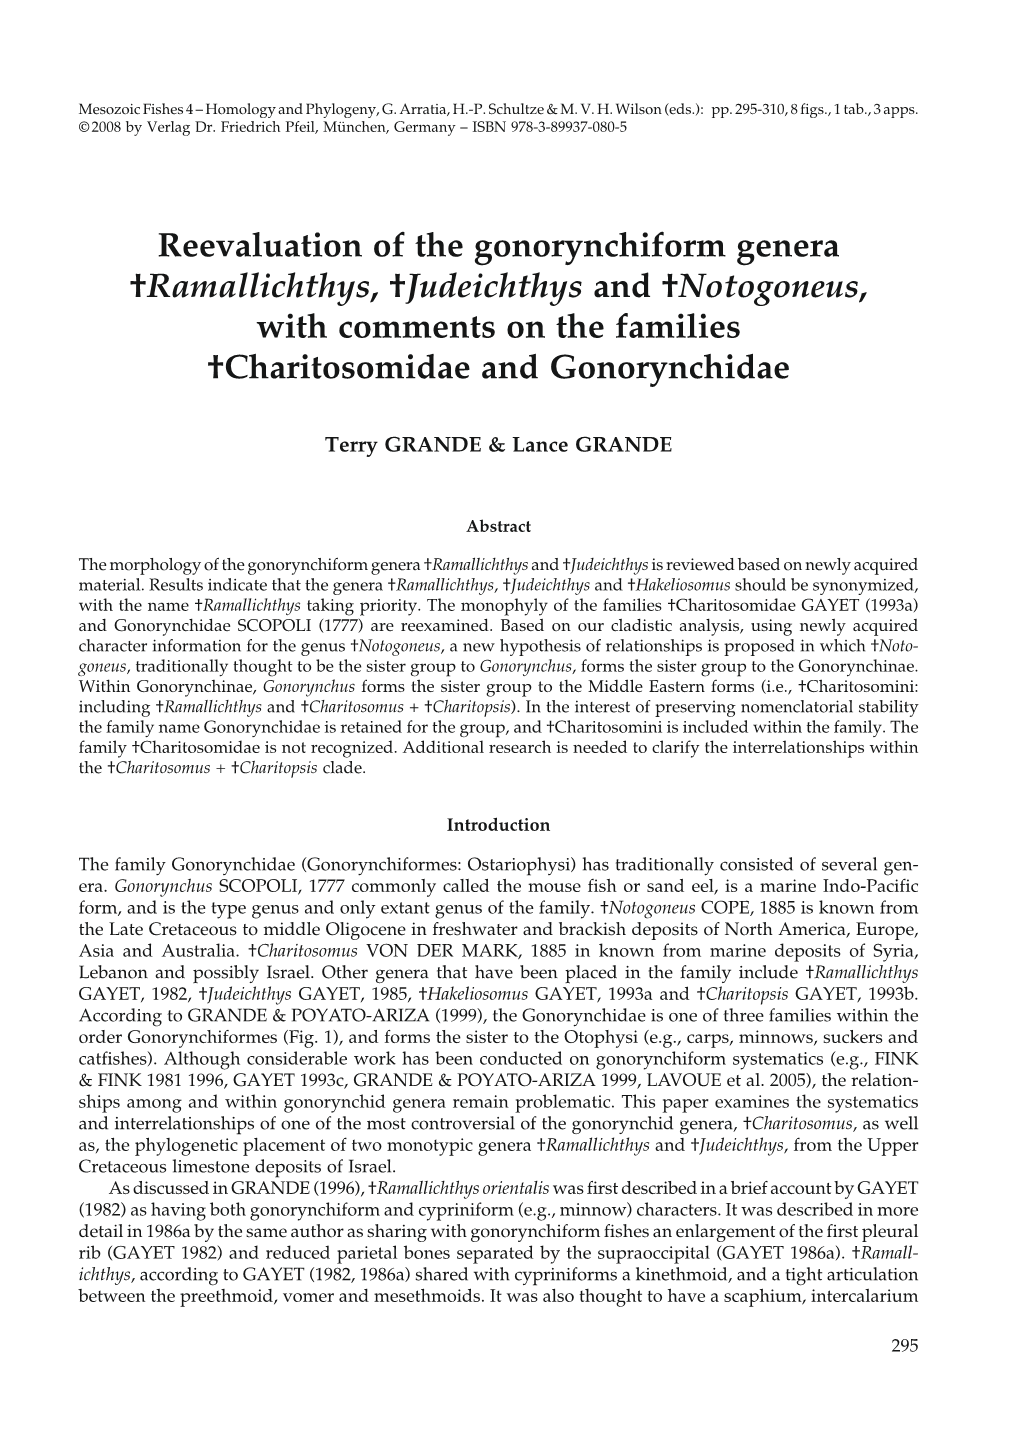 Reevaluation of the Gonorynchiform Genera †Ramallichthys, †Judeichthys and †Notogoneus, with Comments on the Families †Charitosomidae and Gonorynchidae